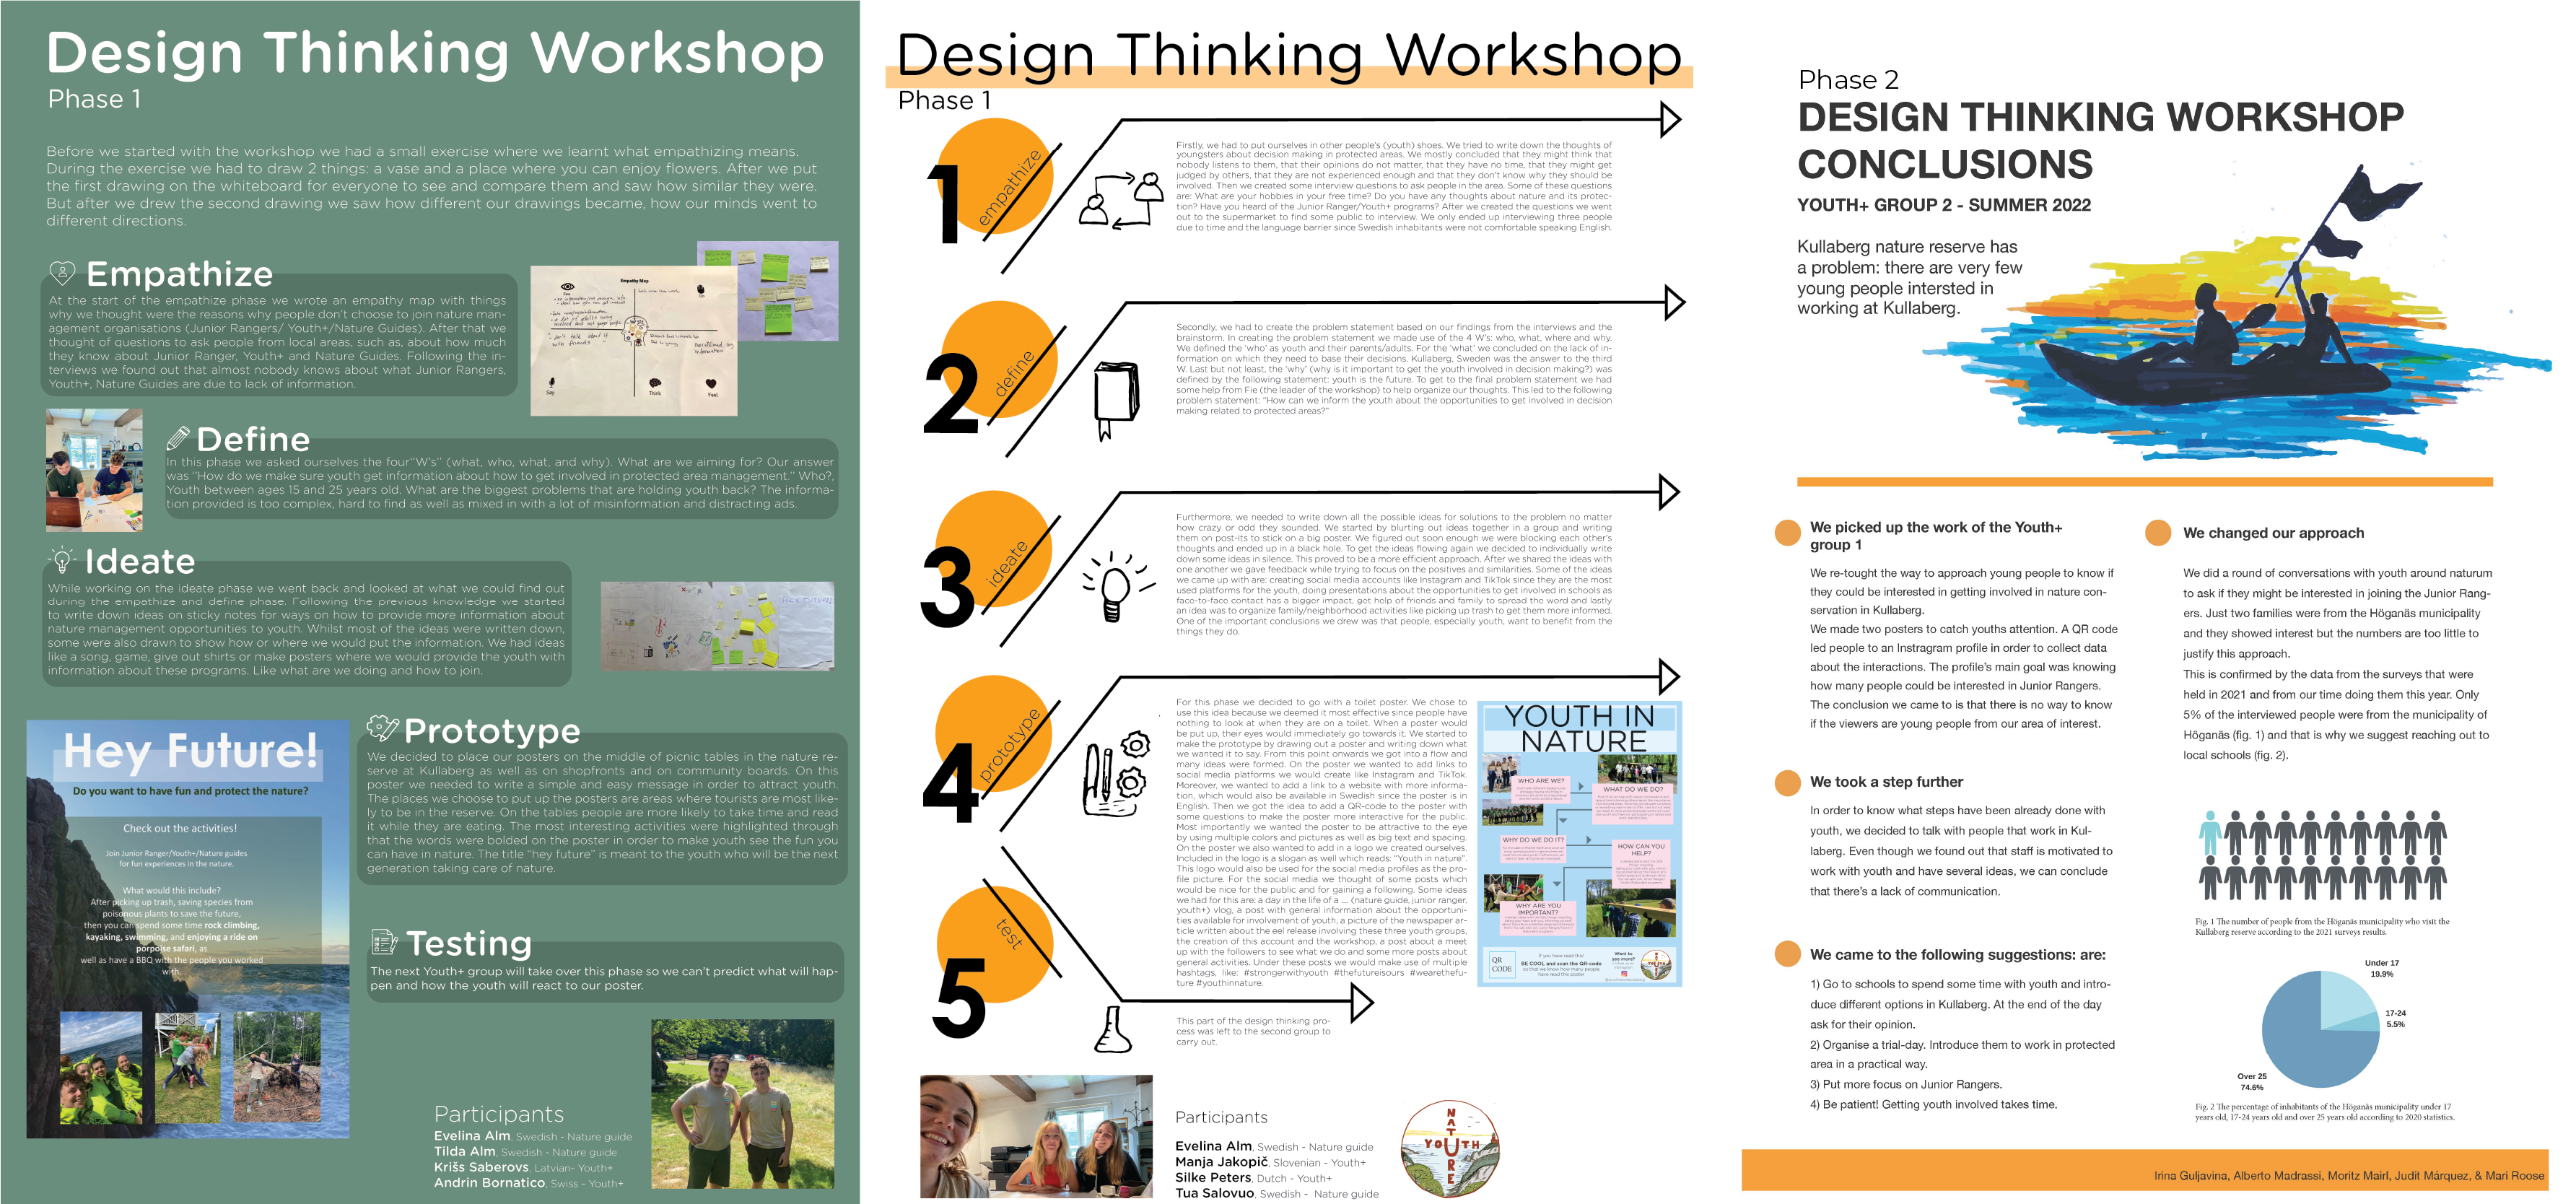 The three posters explaining the Design Thinking Process of Groups 1A, Group 1B (both doing Phase 1) and Group 2 (doing Phase 2)